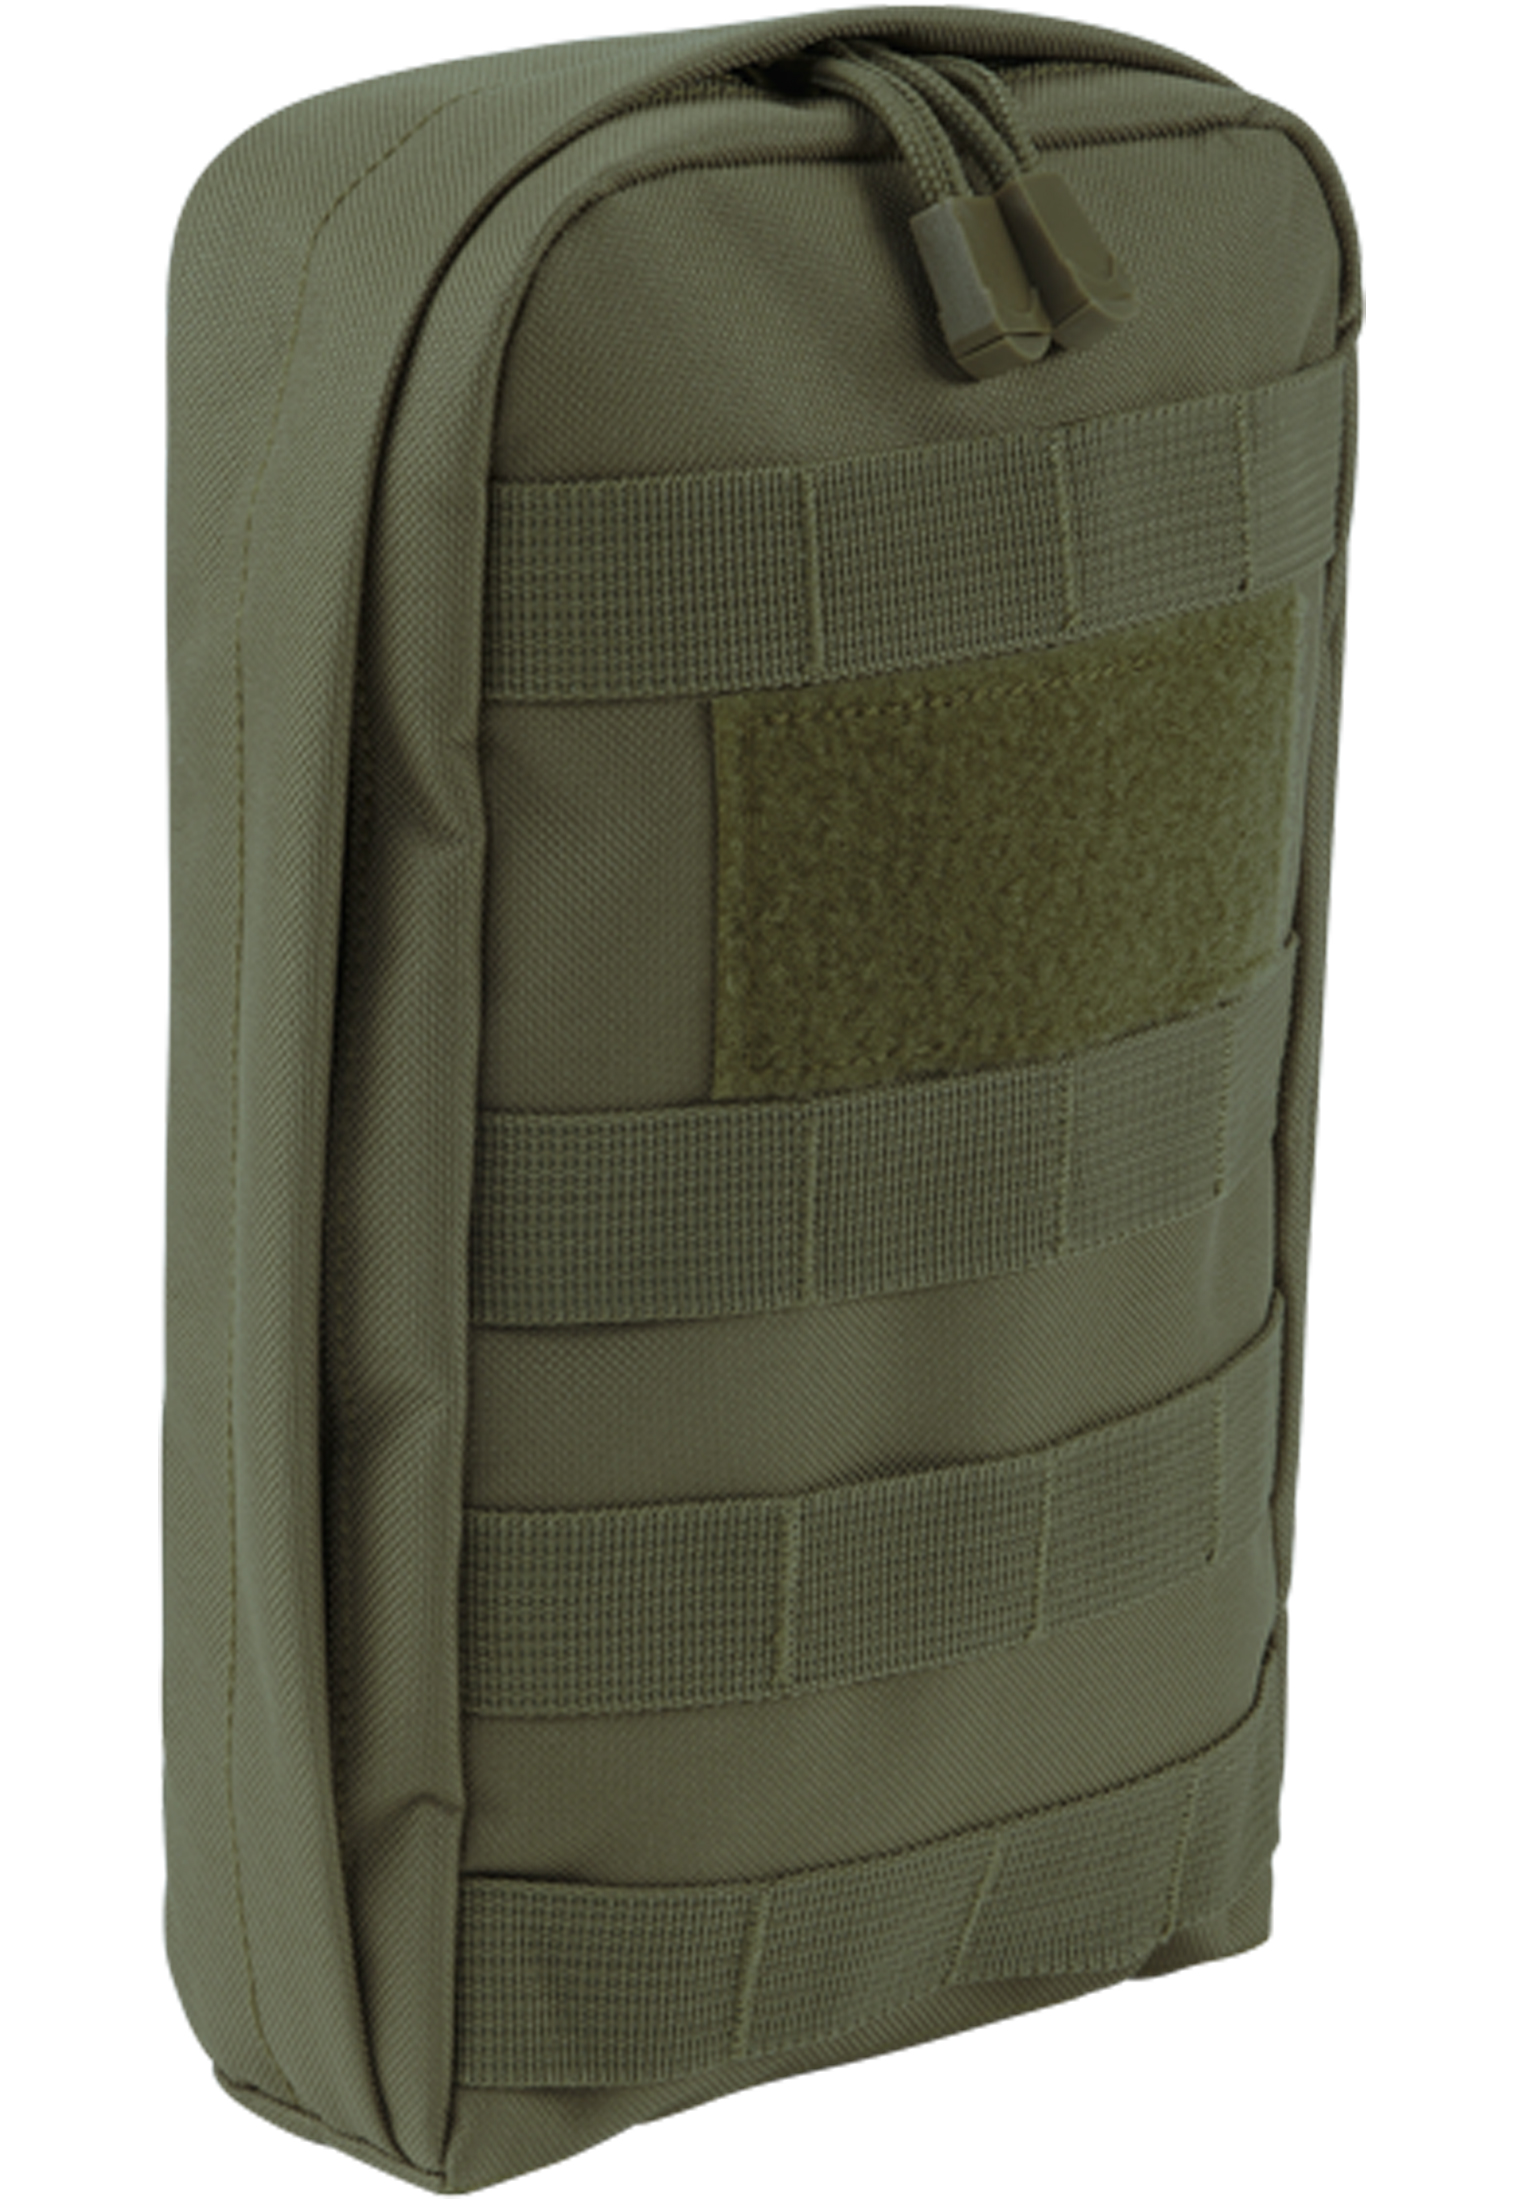 Accessoires Snake Molle Pouch in Farbe olive